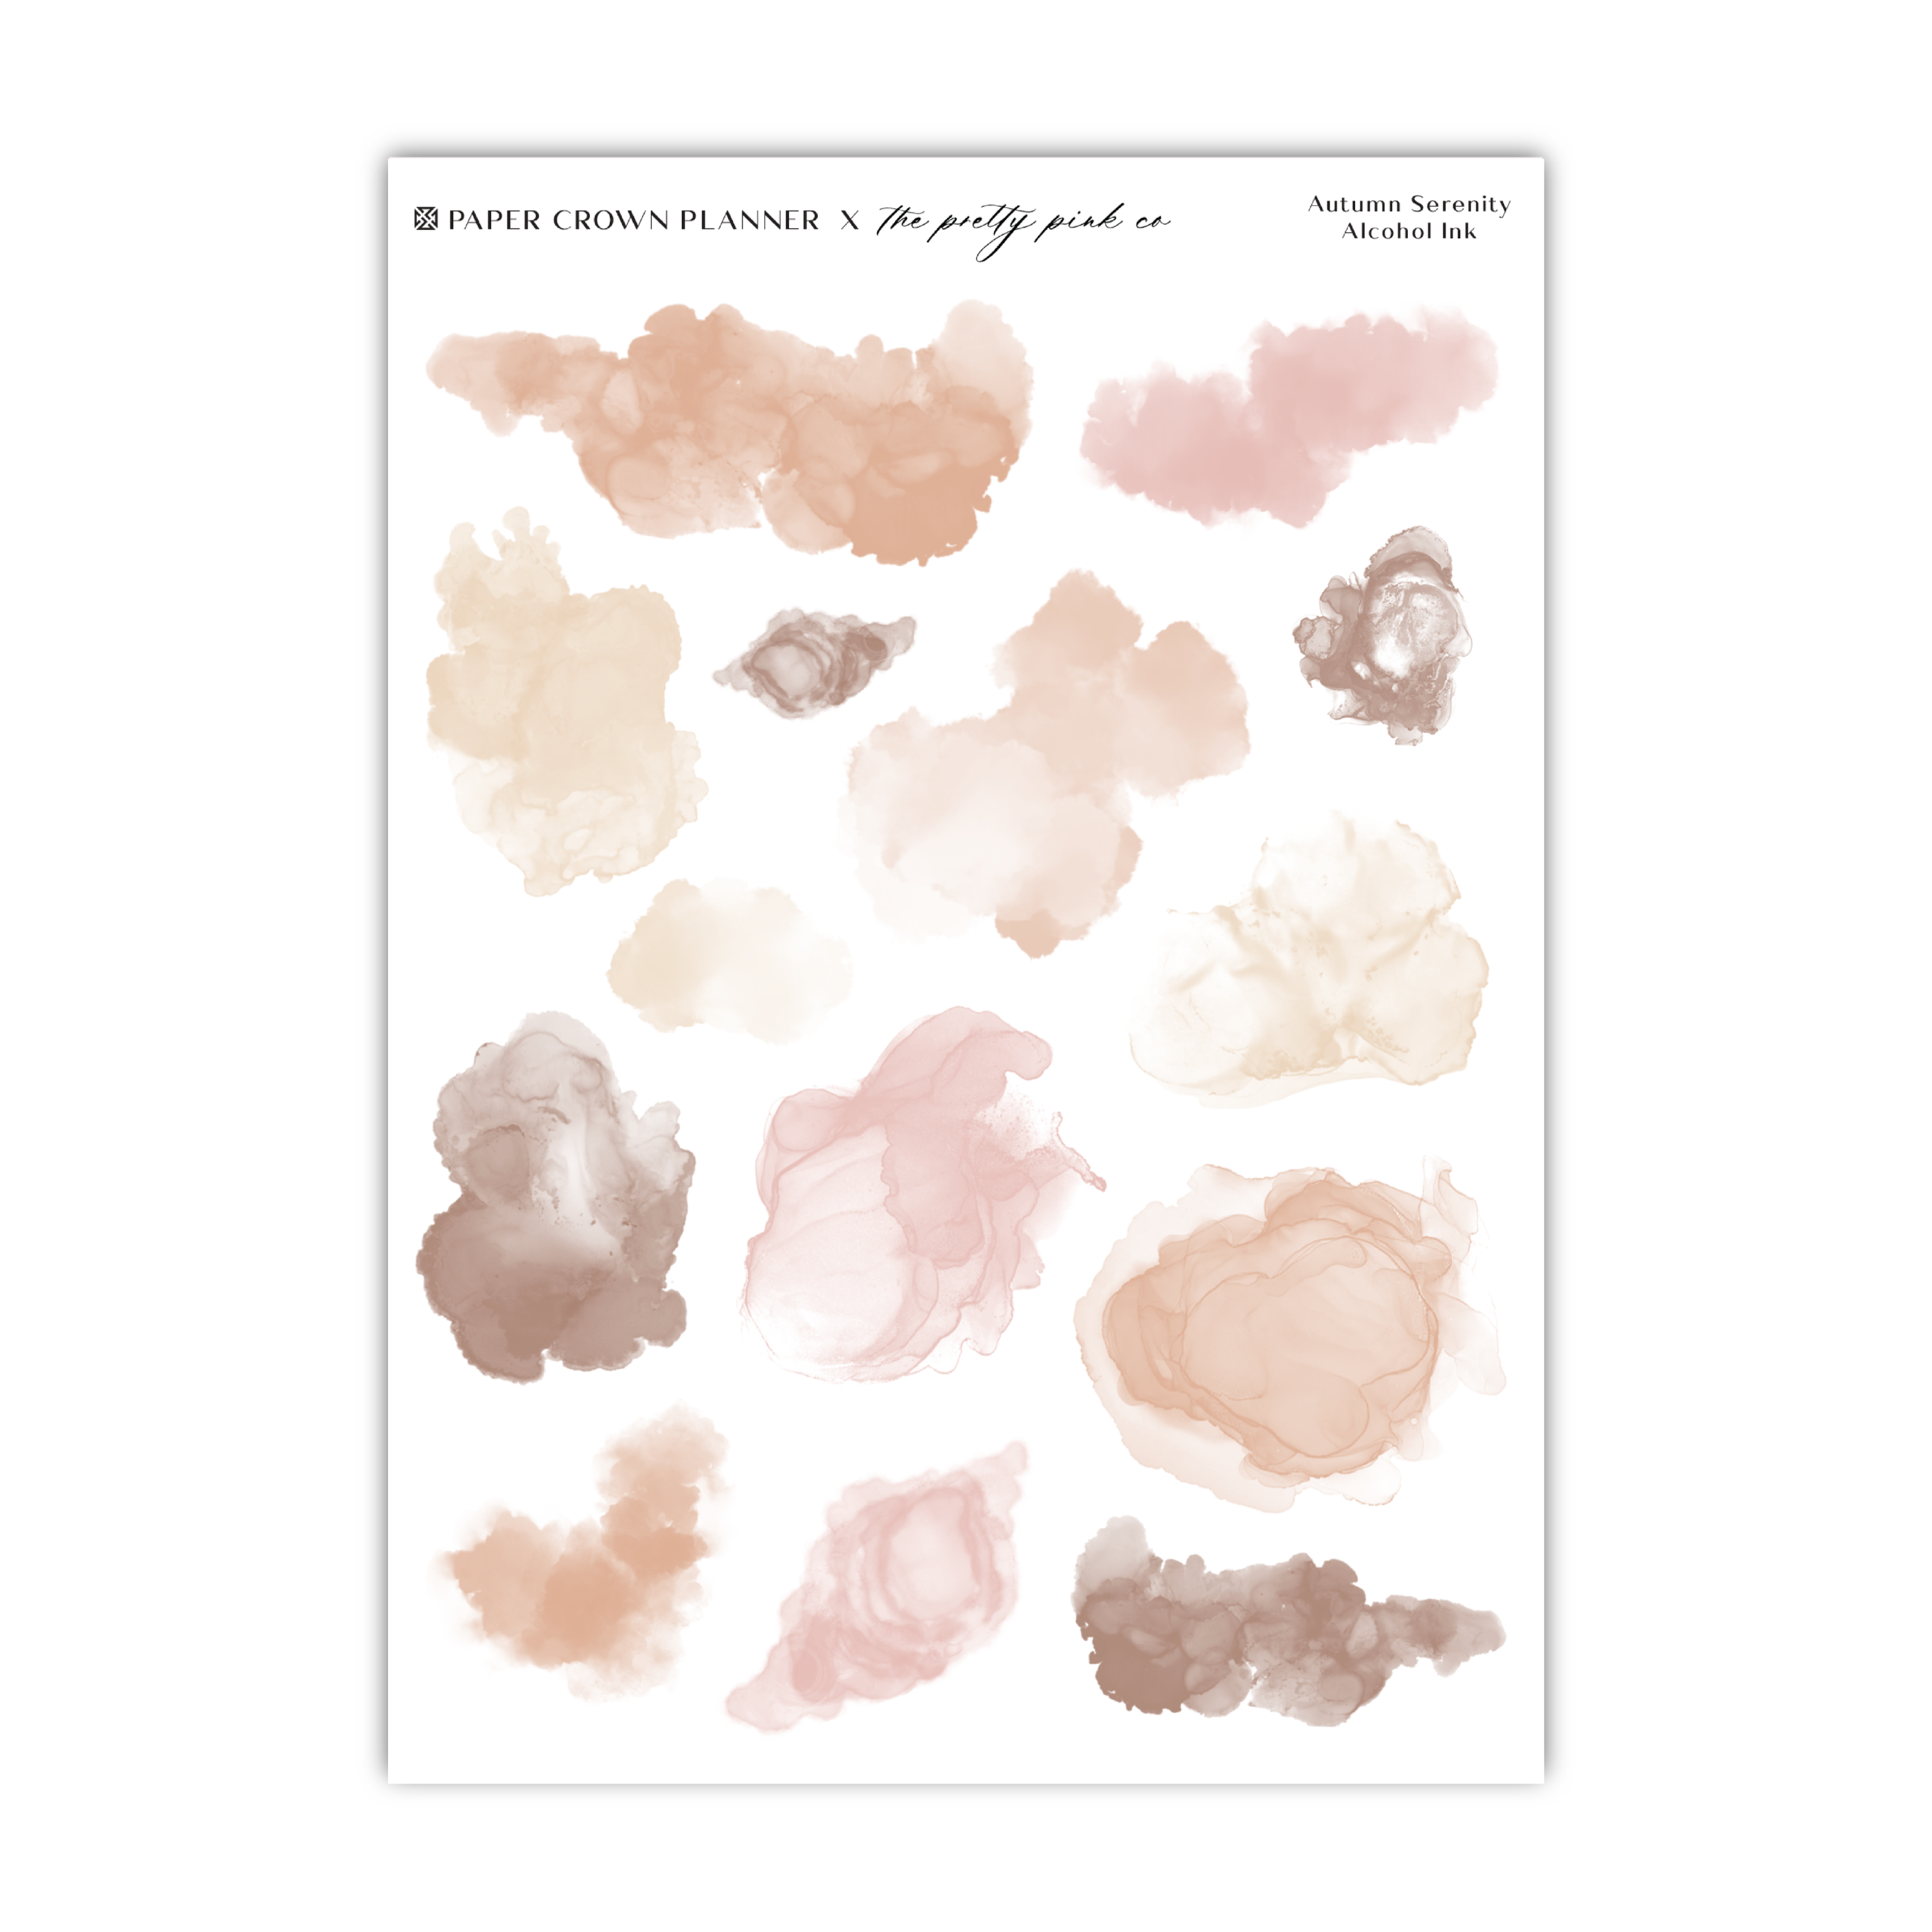 a sheet of watercolor paint on a white background